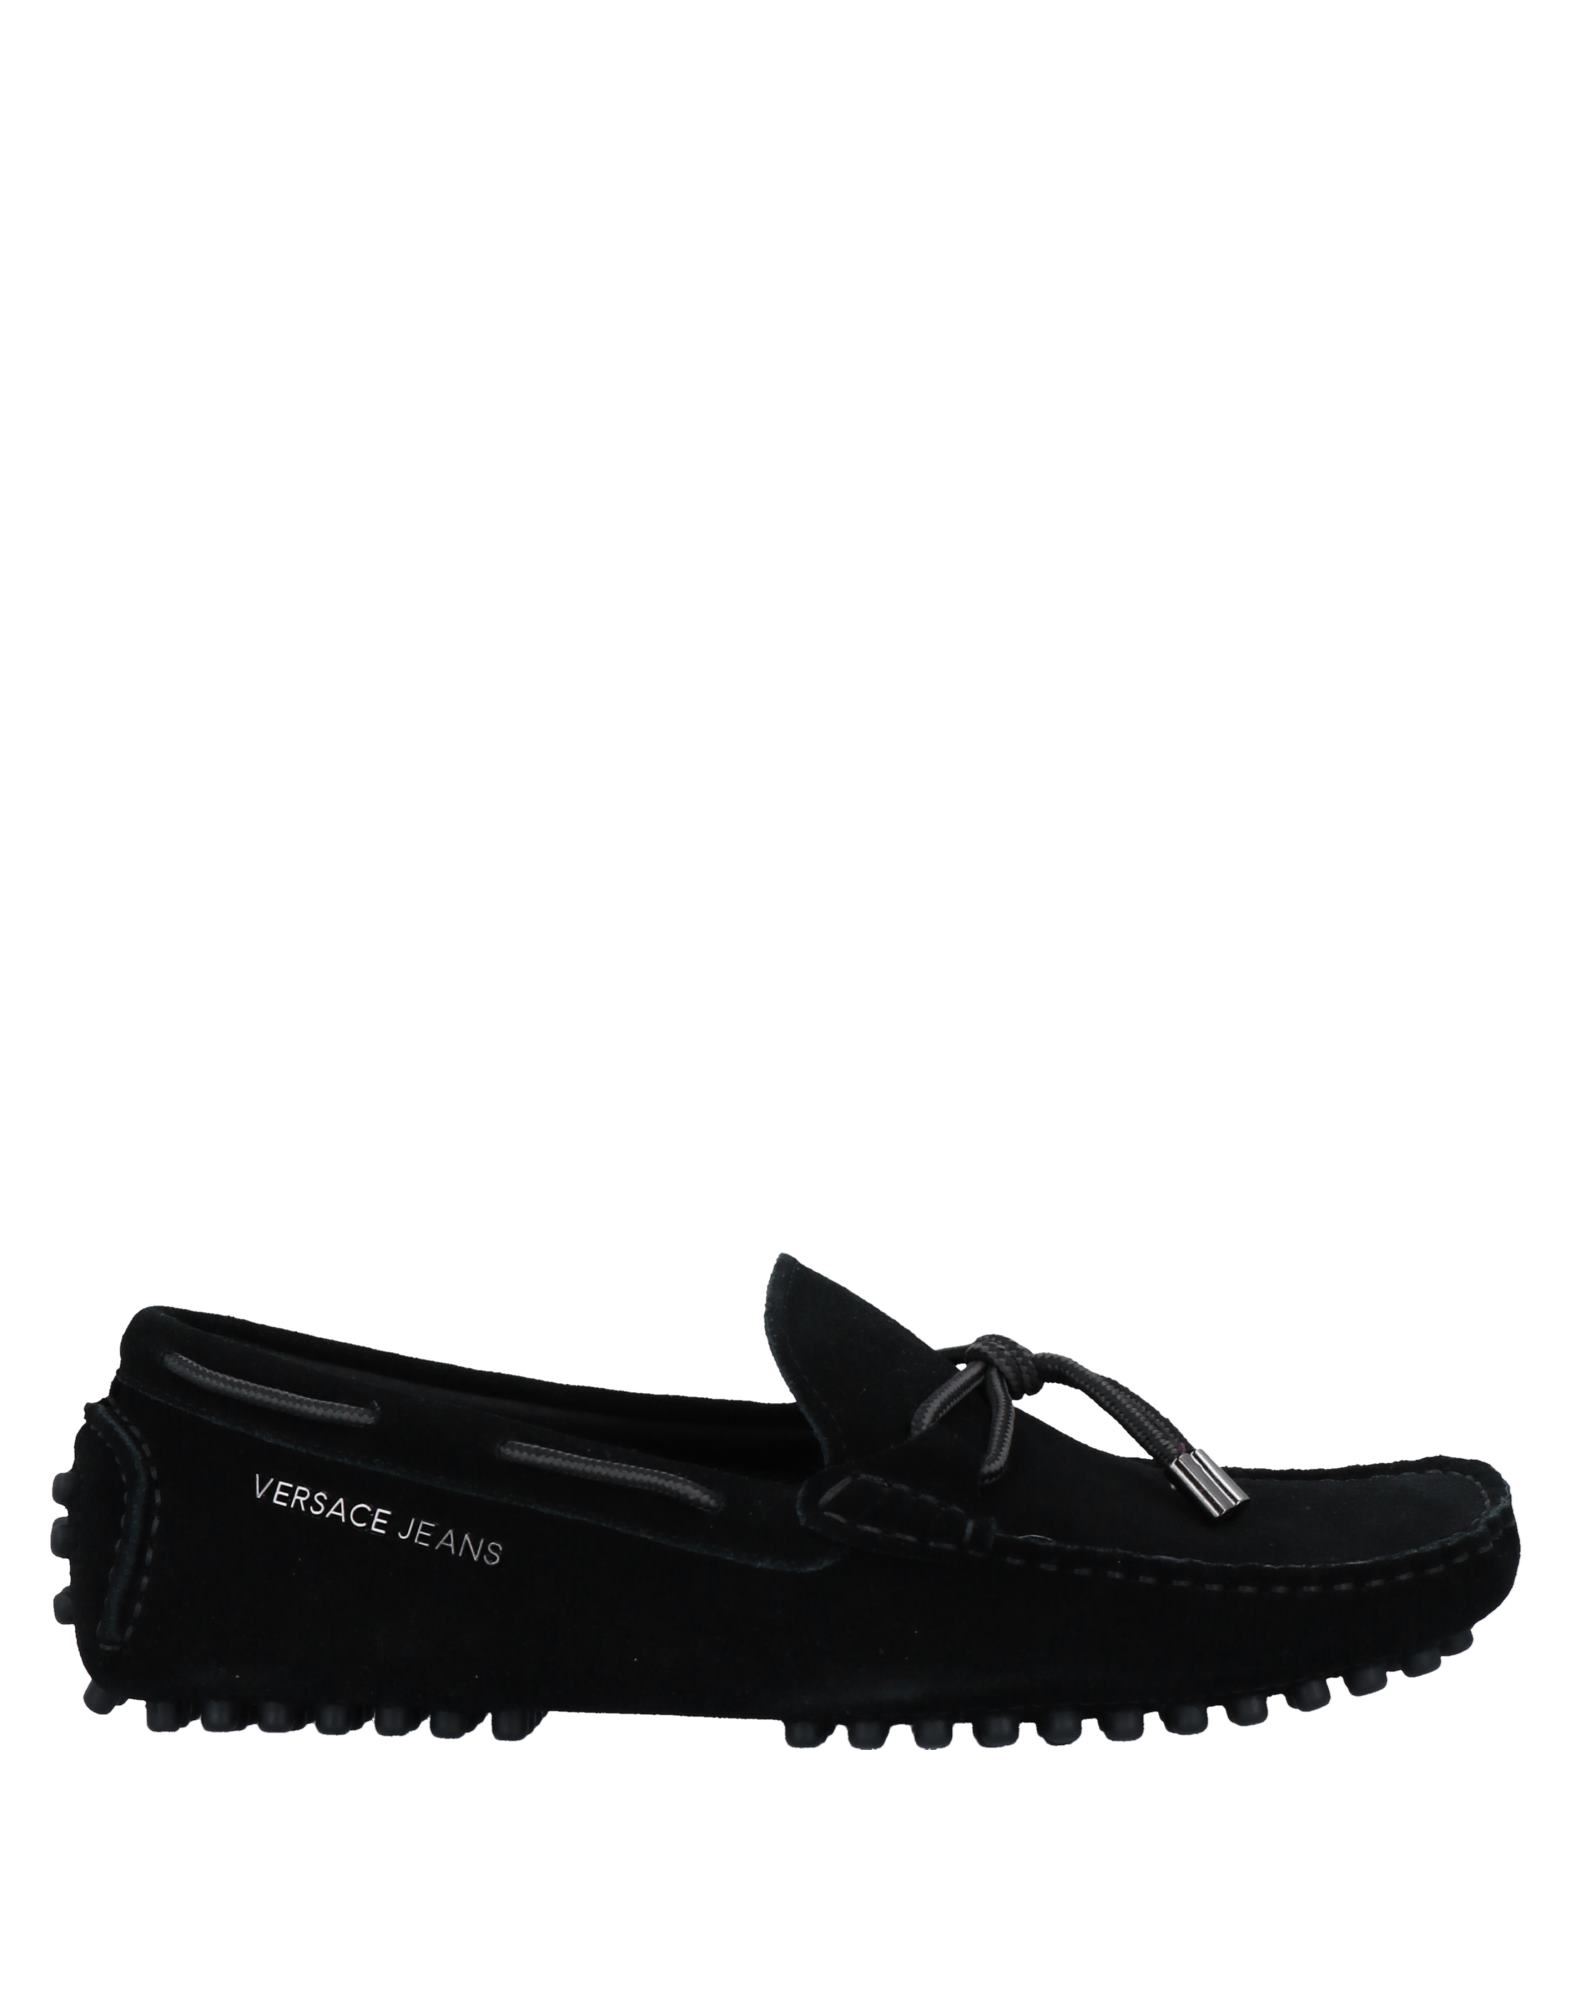 Versace Jeans Loafers In Black